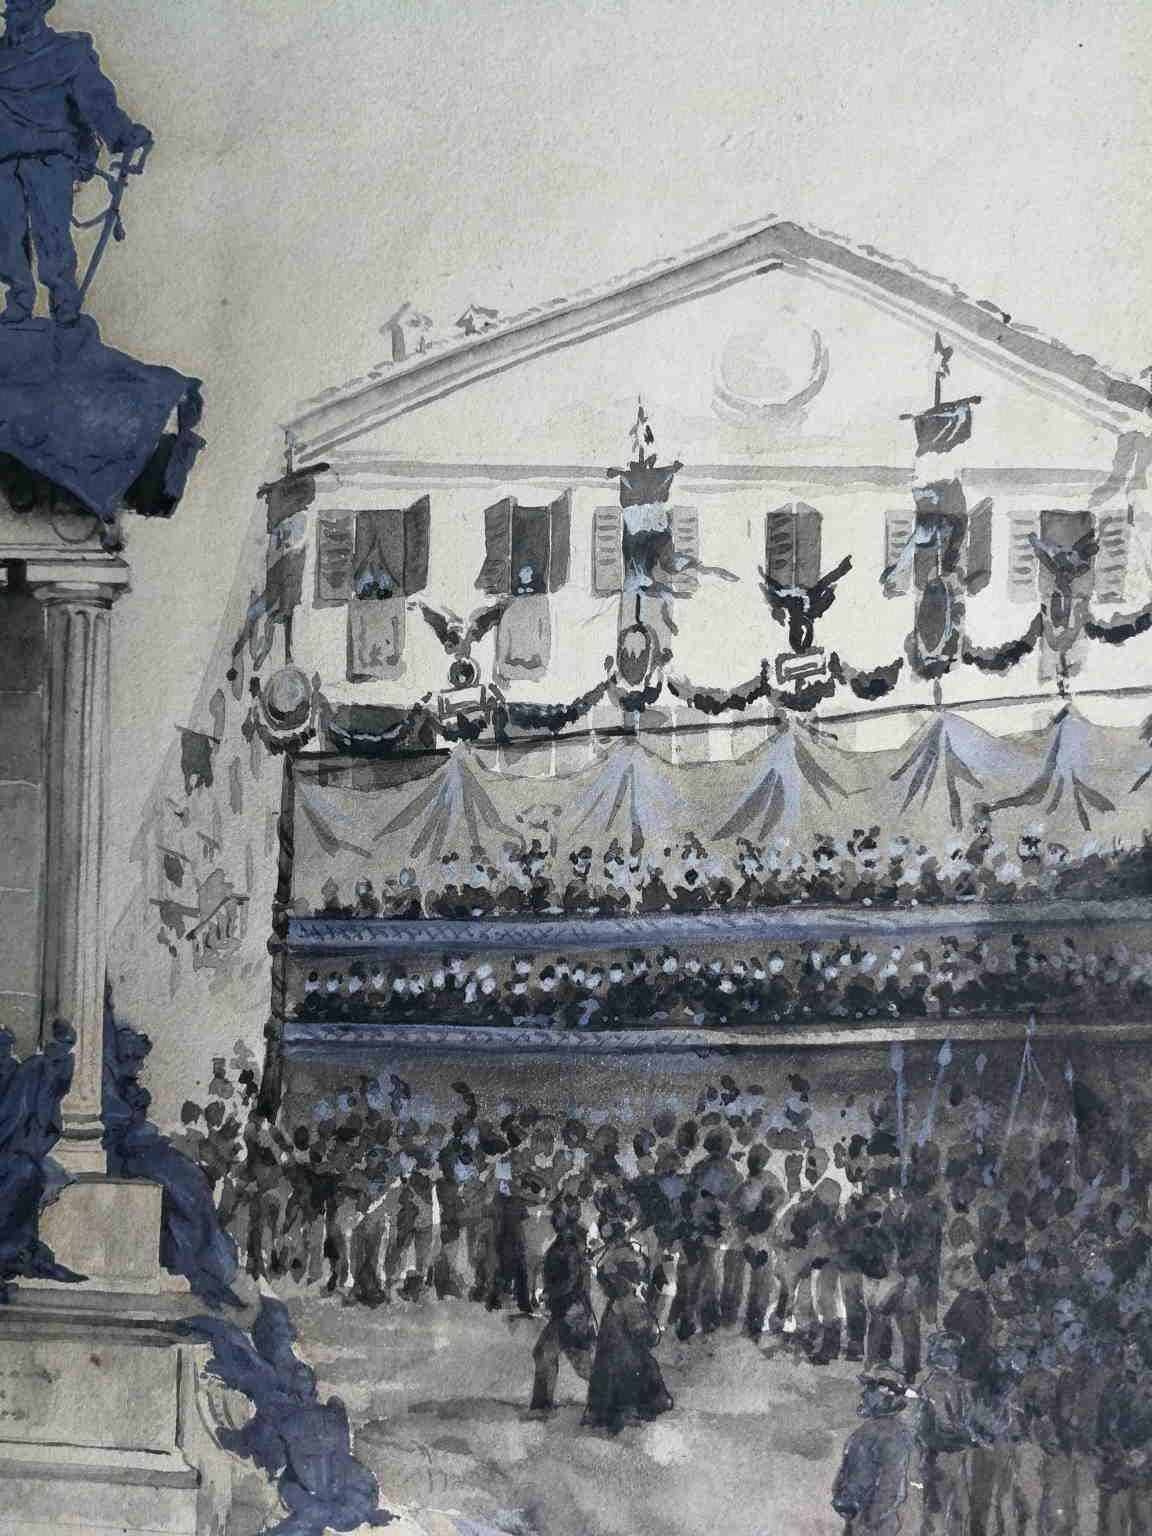 This drawing represents the grand opening of the monument dedicated to Victor Emmanuel II, the first king of Italy, that happened in Turin on September 9, 1899, twenty years after his death.
It was wanted by his son, King Umberto I and made by the